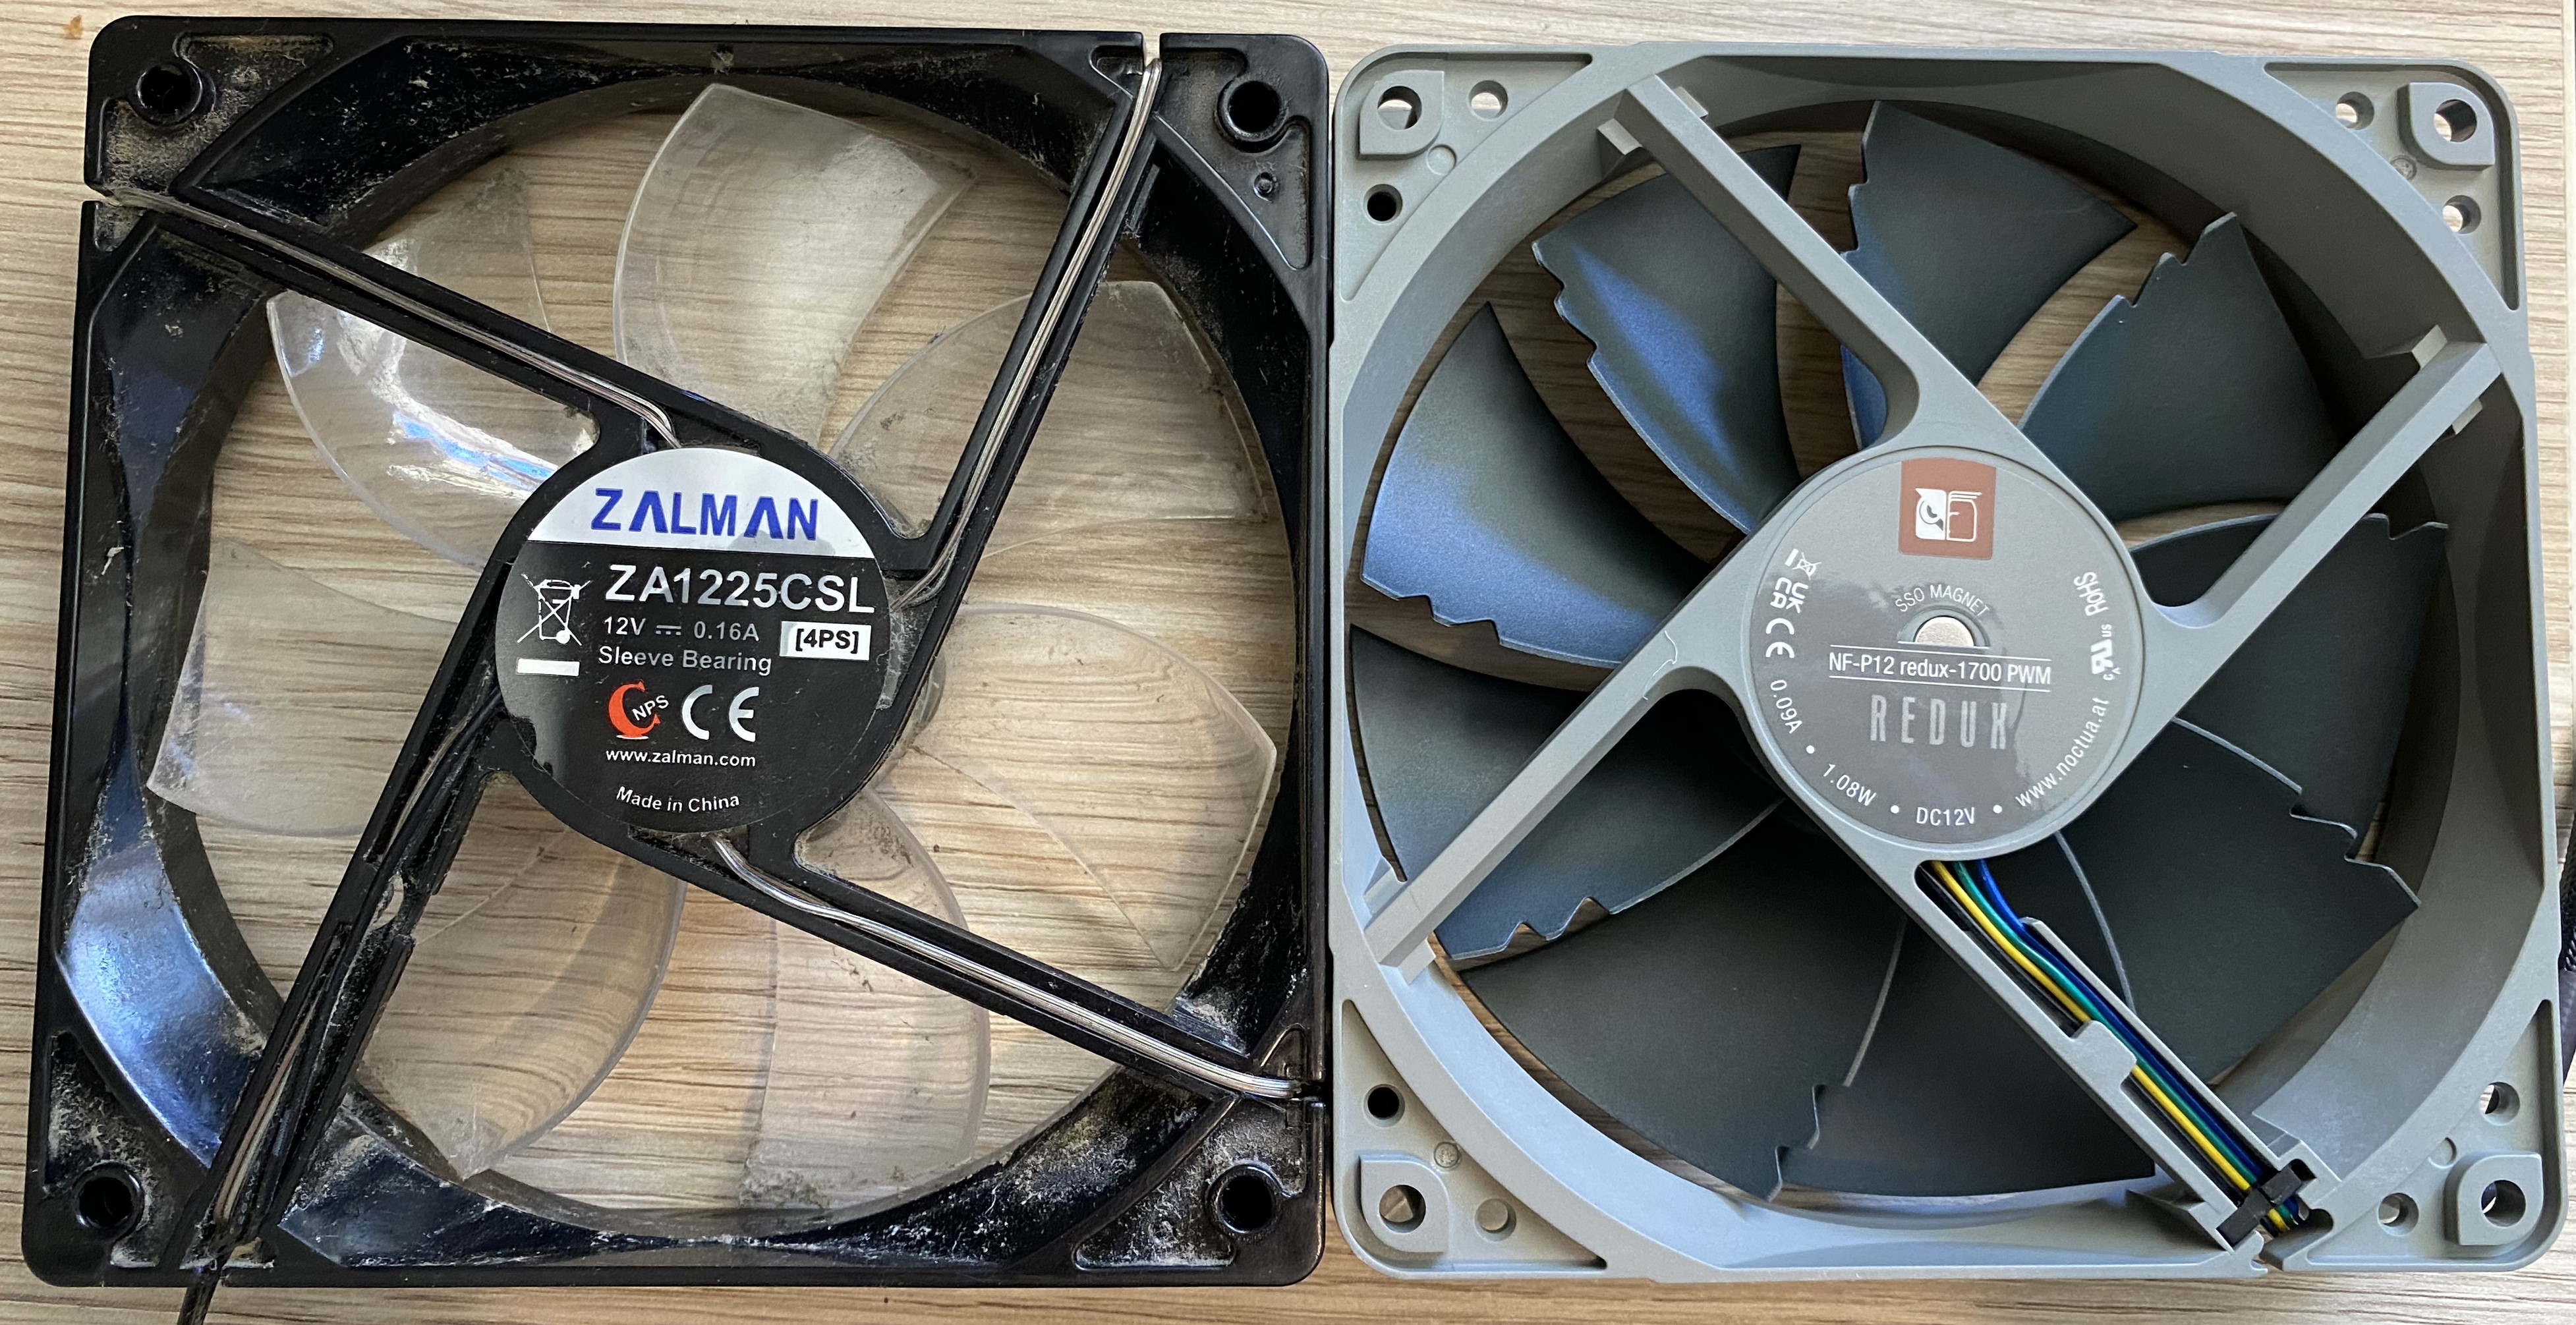 An old and new compter fan side by side